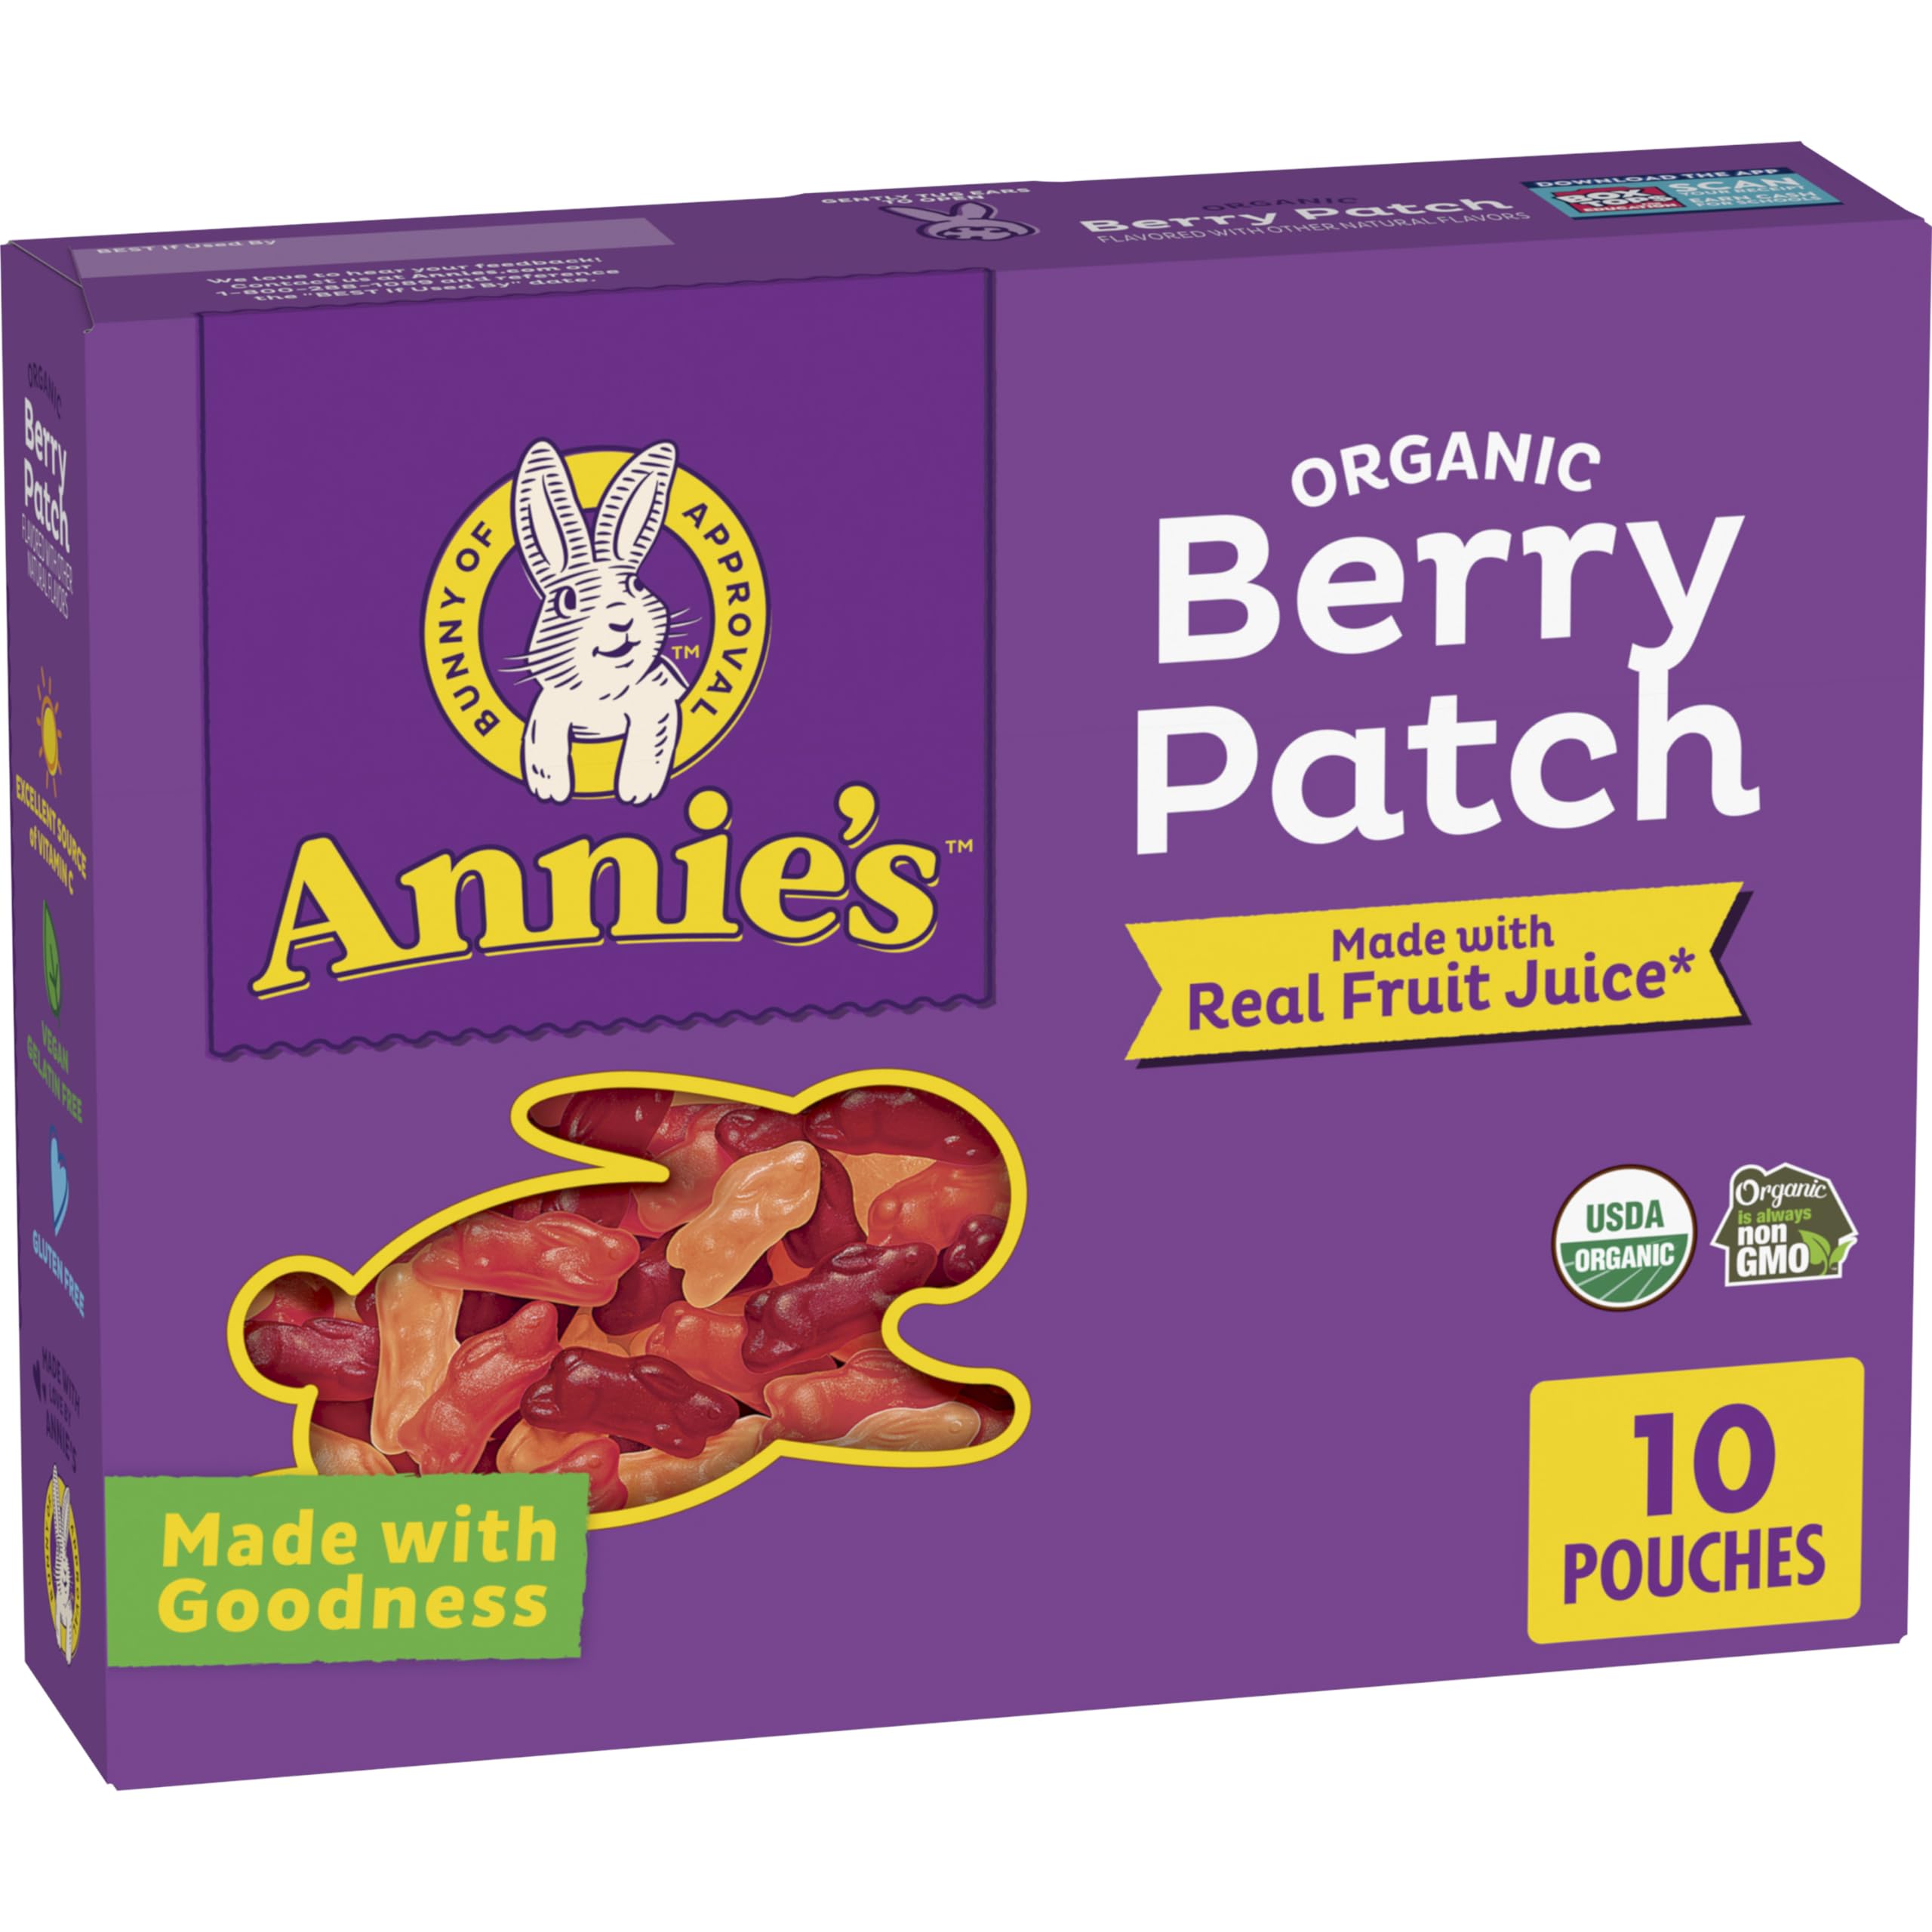 10-Pack 7-Oz Annie's Organic Berry Patch Bunny Fruit Flavored Snacks $2.60 (26c Ea) w/ S&S + Free Shipping w/ Prime or on $35+